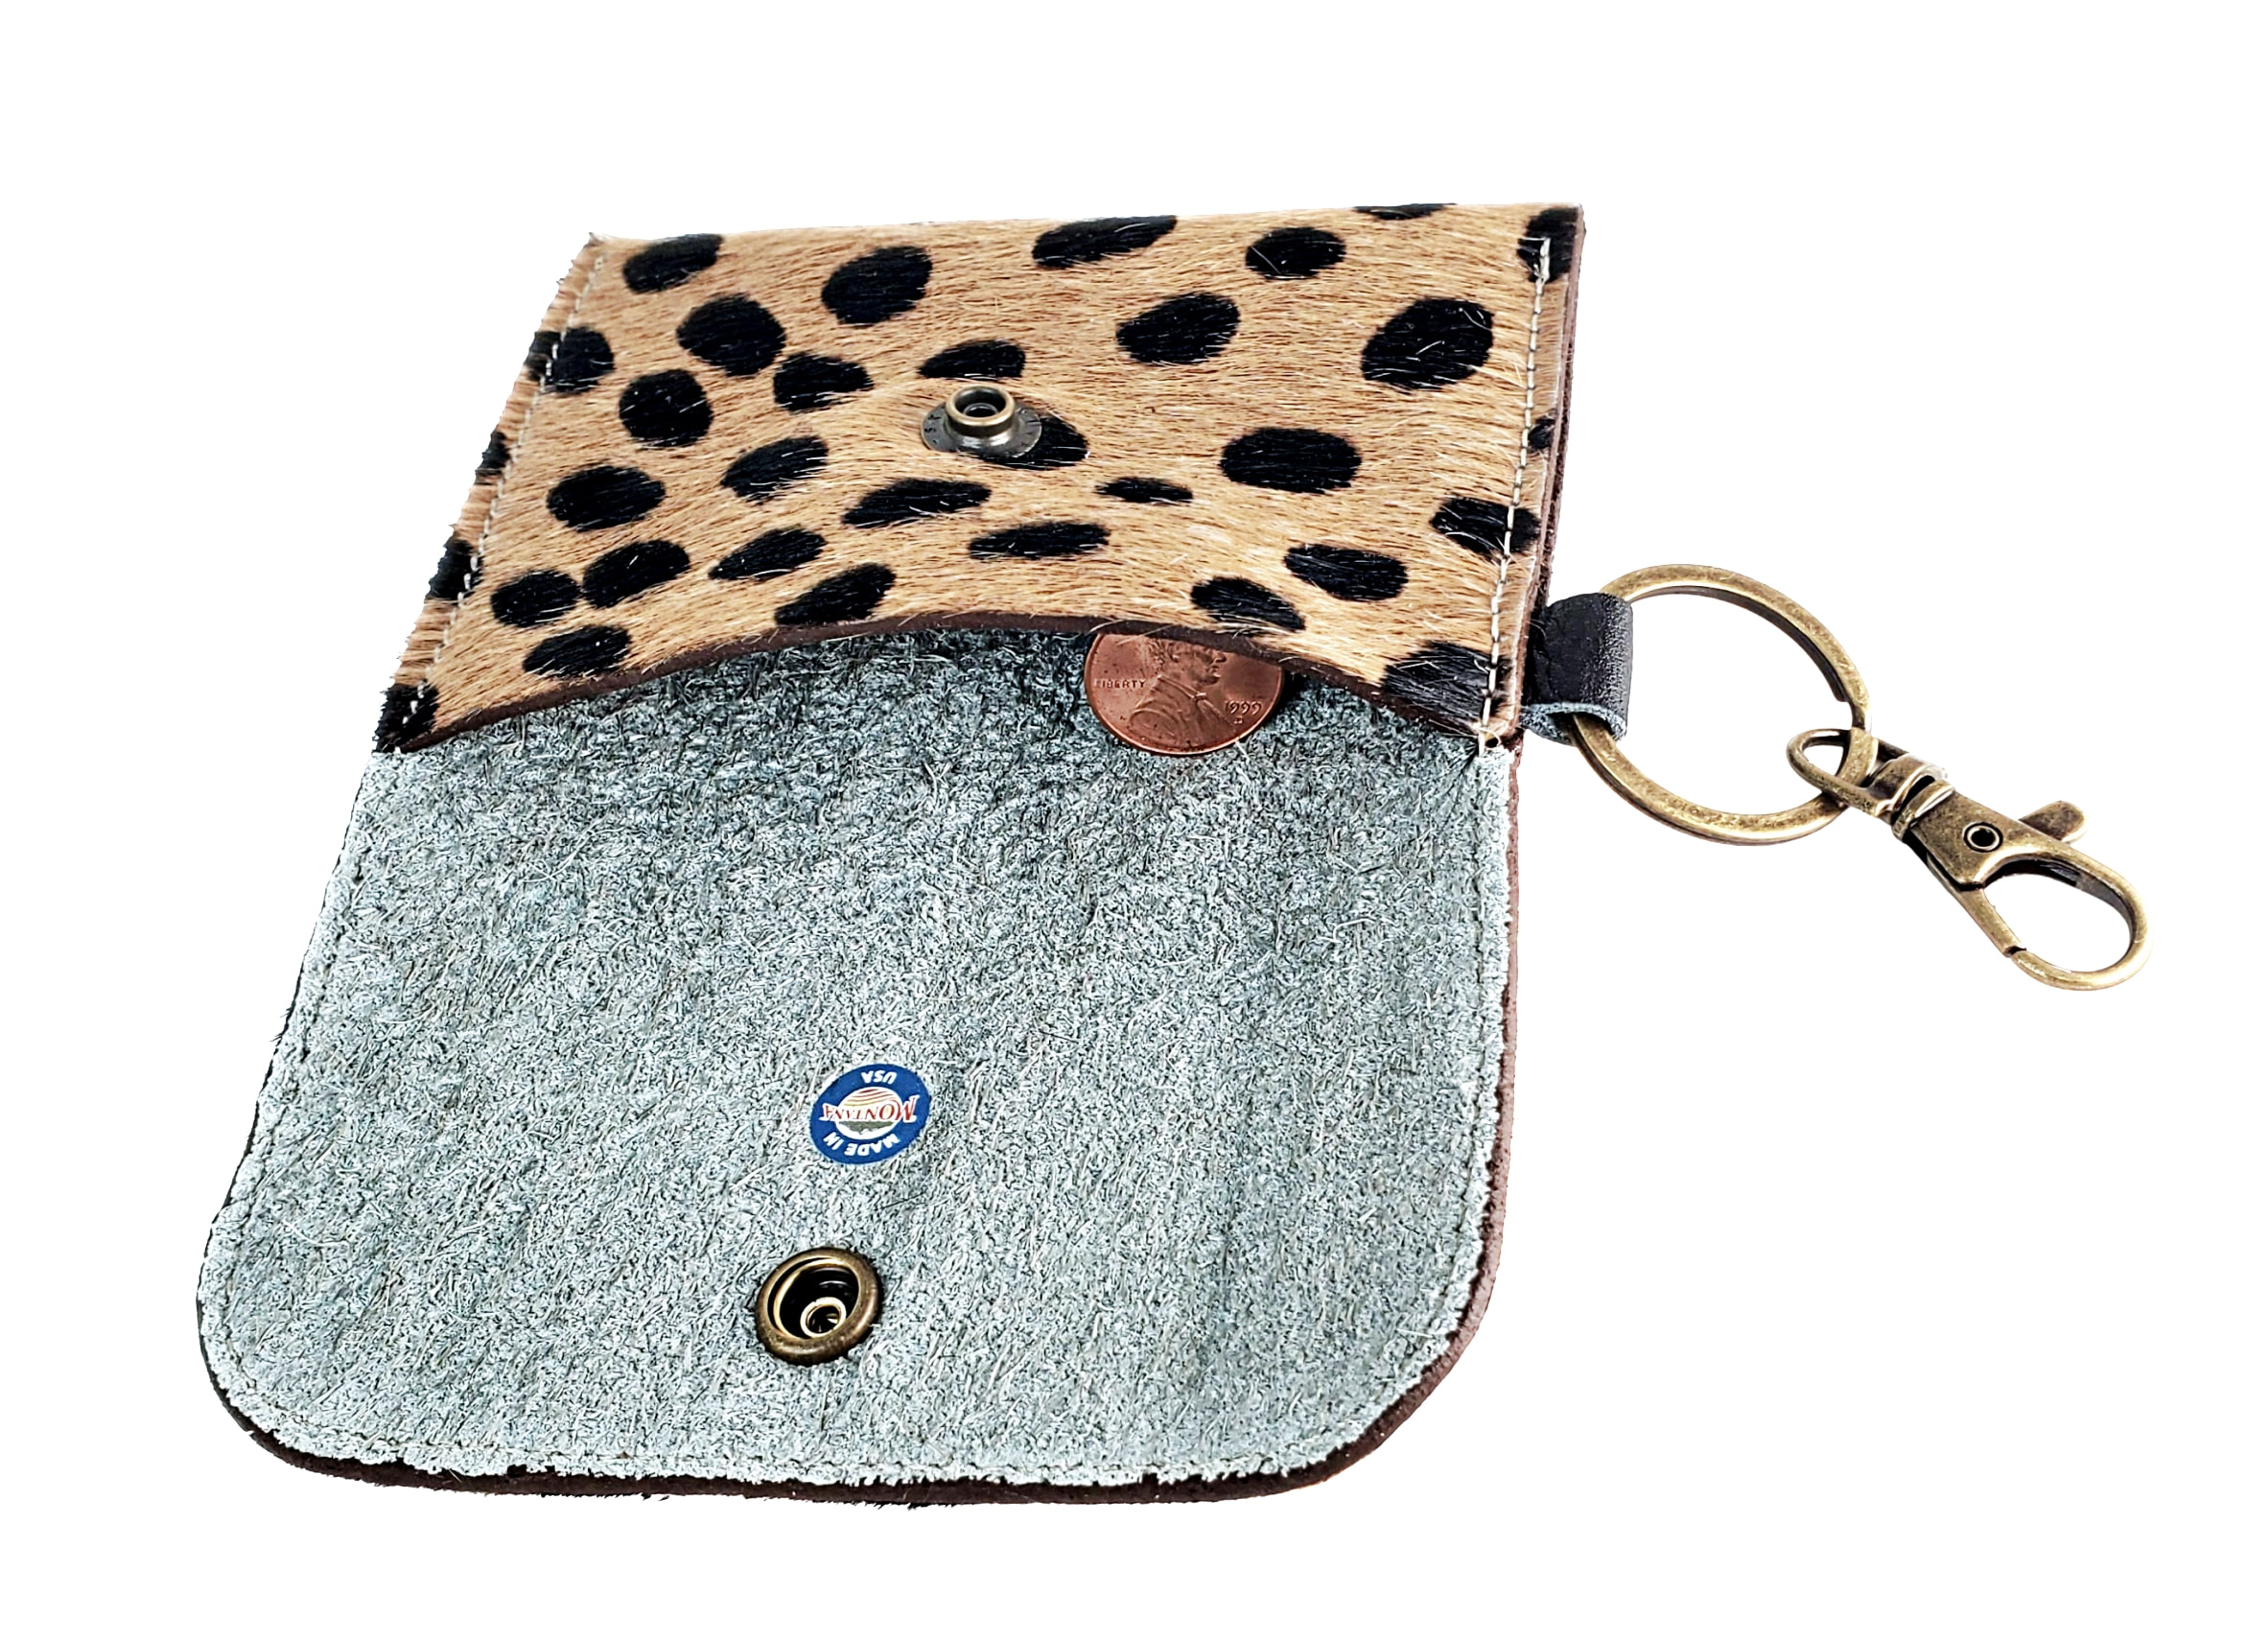 Key Chain ID Card Wallet, Cowhide Leather, Business Card Holder, Keep Cards  Secure, Clip Inside Large Purse to Grab & Go